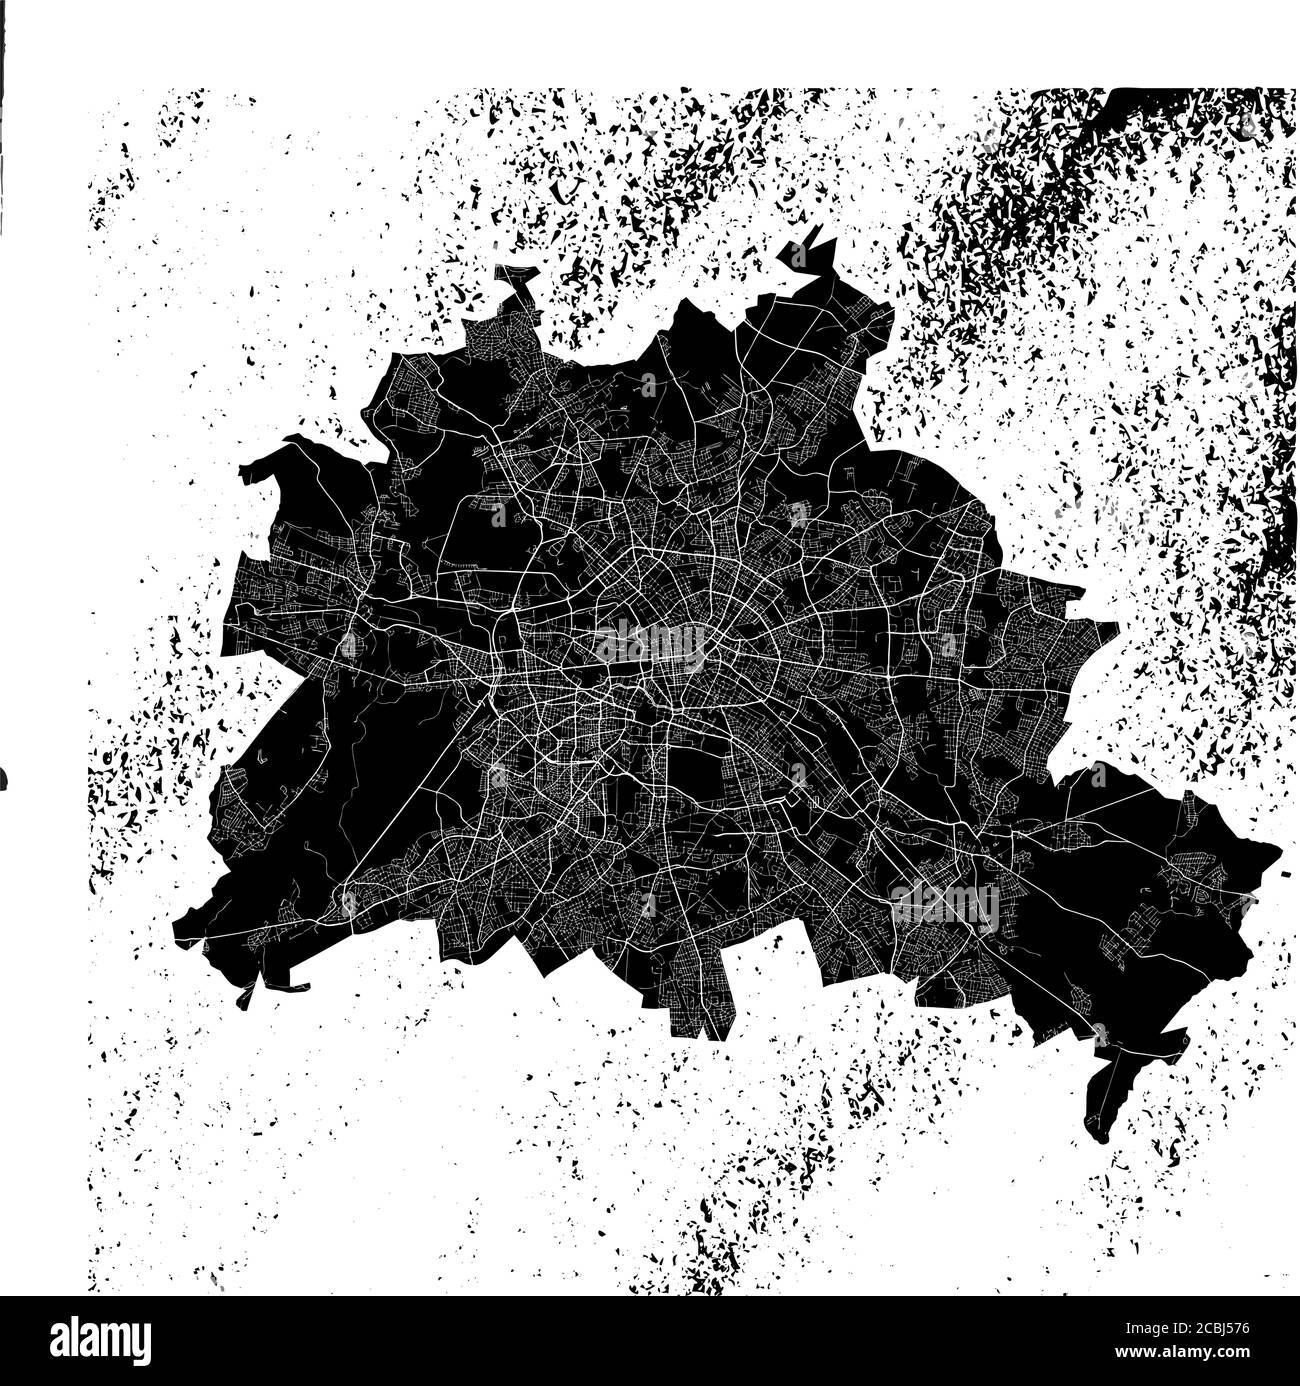 Berlin map on vintage background. Black and white hand drawn illustration. Icon sign for print and labelling. Stock Vector